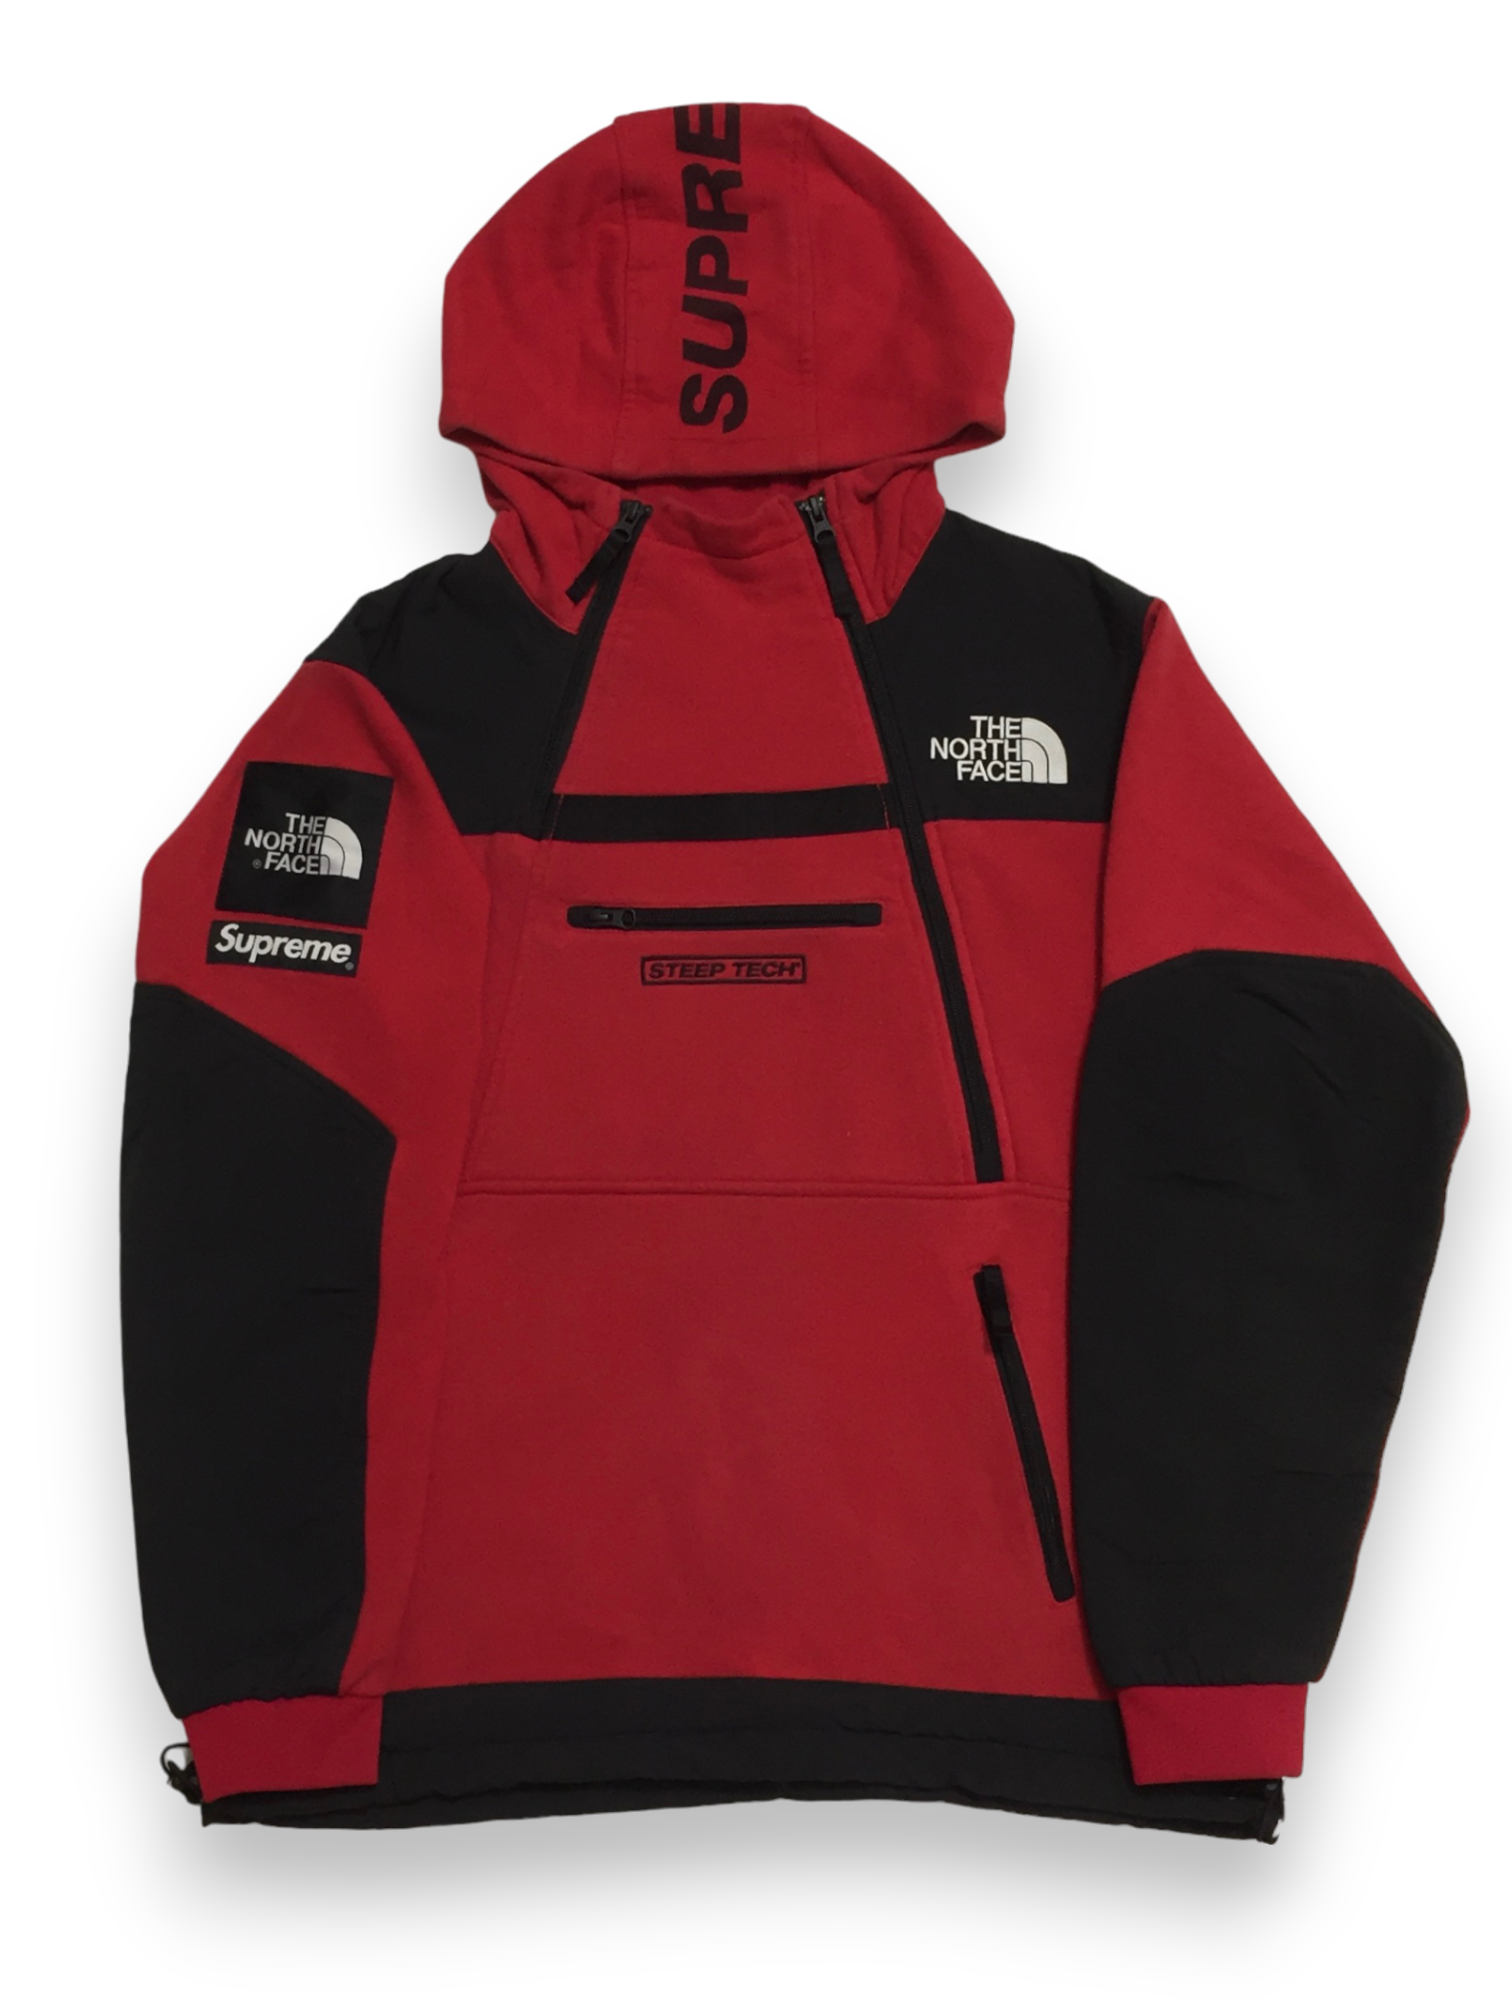 2016 Supreme x The North Face Steep Tech Red Fleece